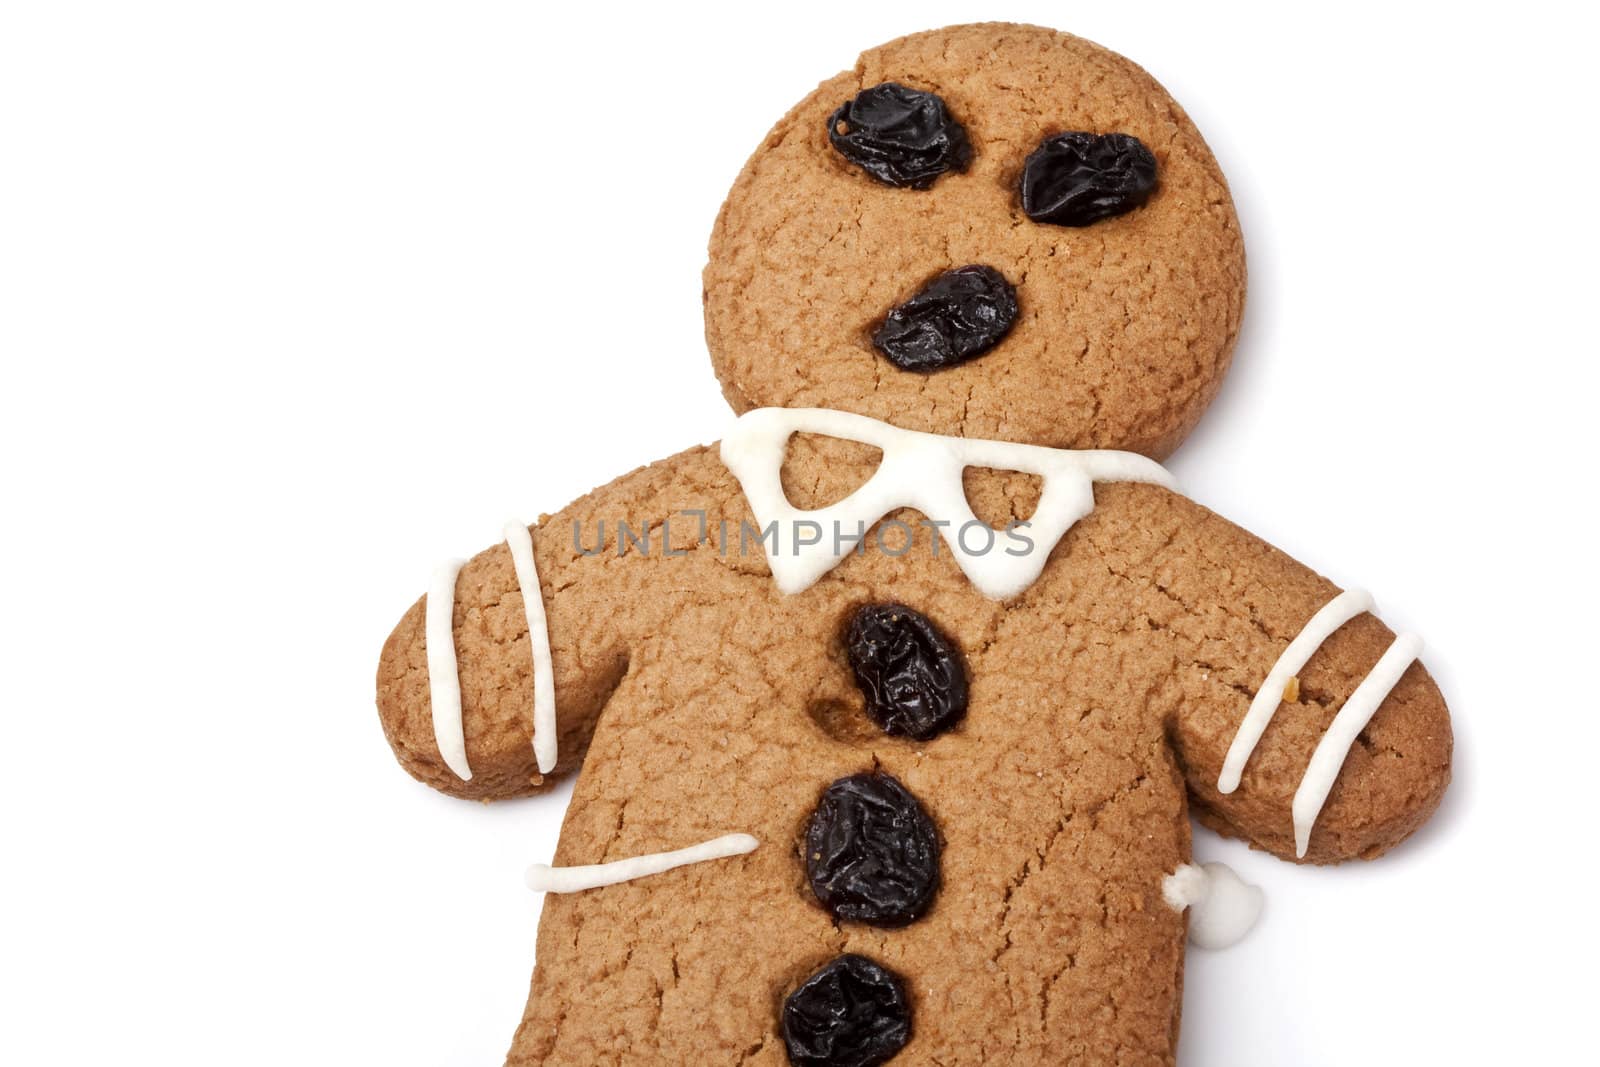 Gingerbread man by posterize